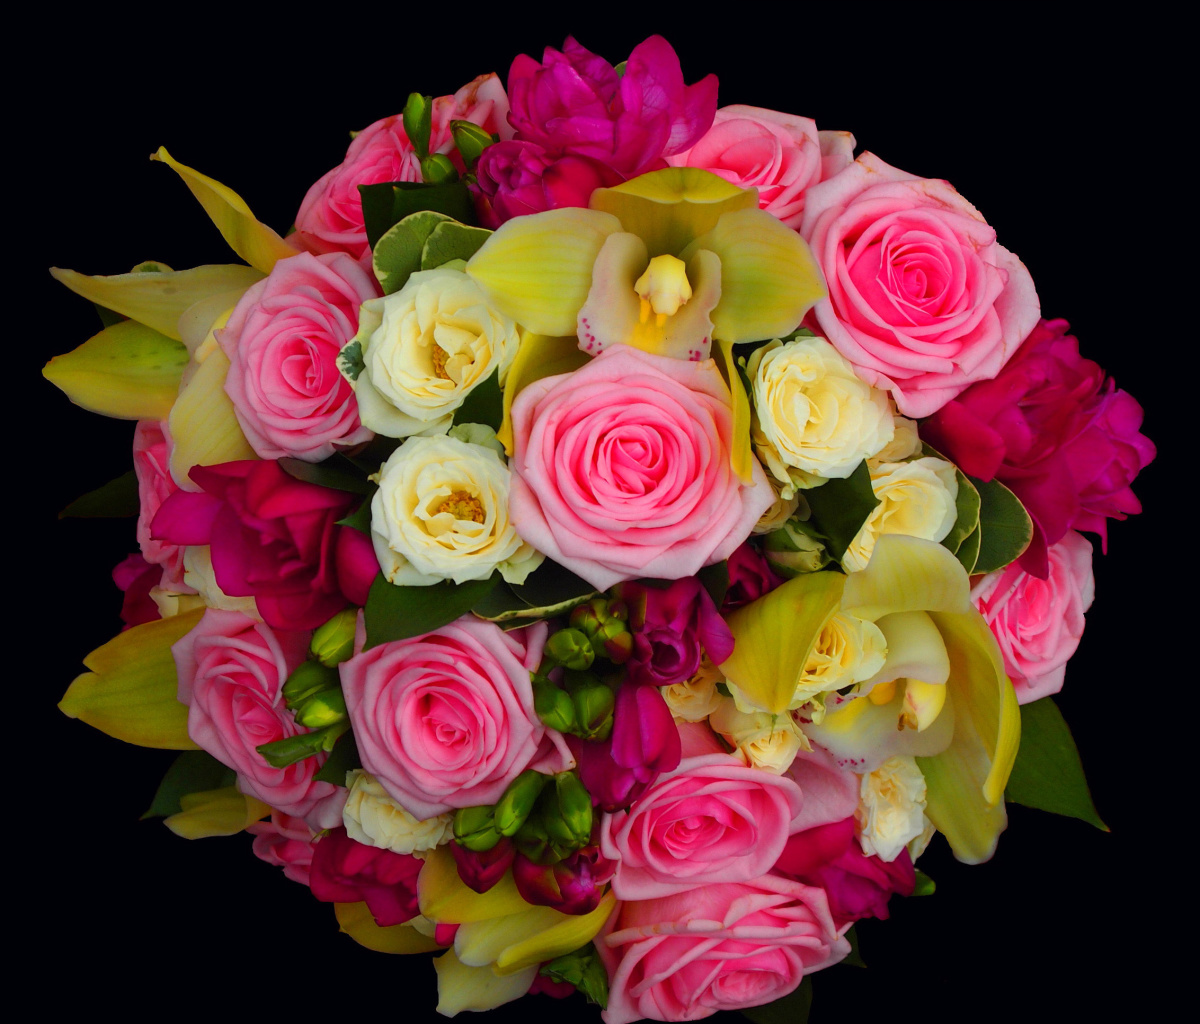 Bouquet of roses and yellow orchid, floristry screenshot #1 1200x1024